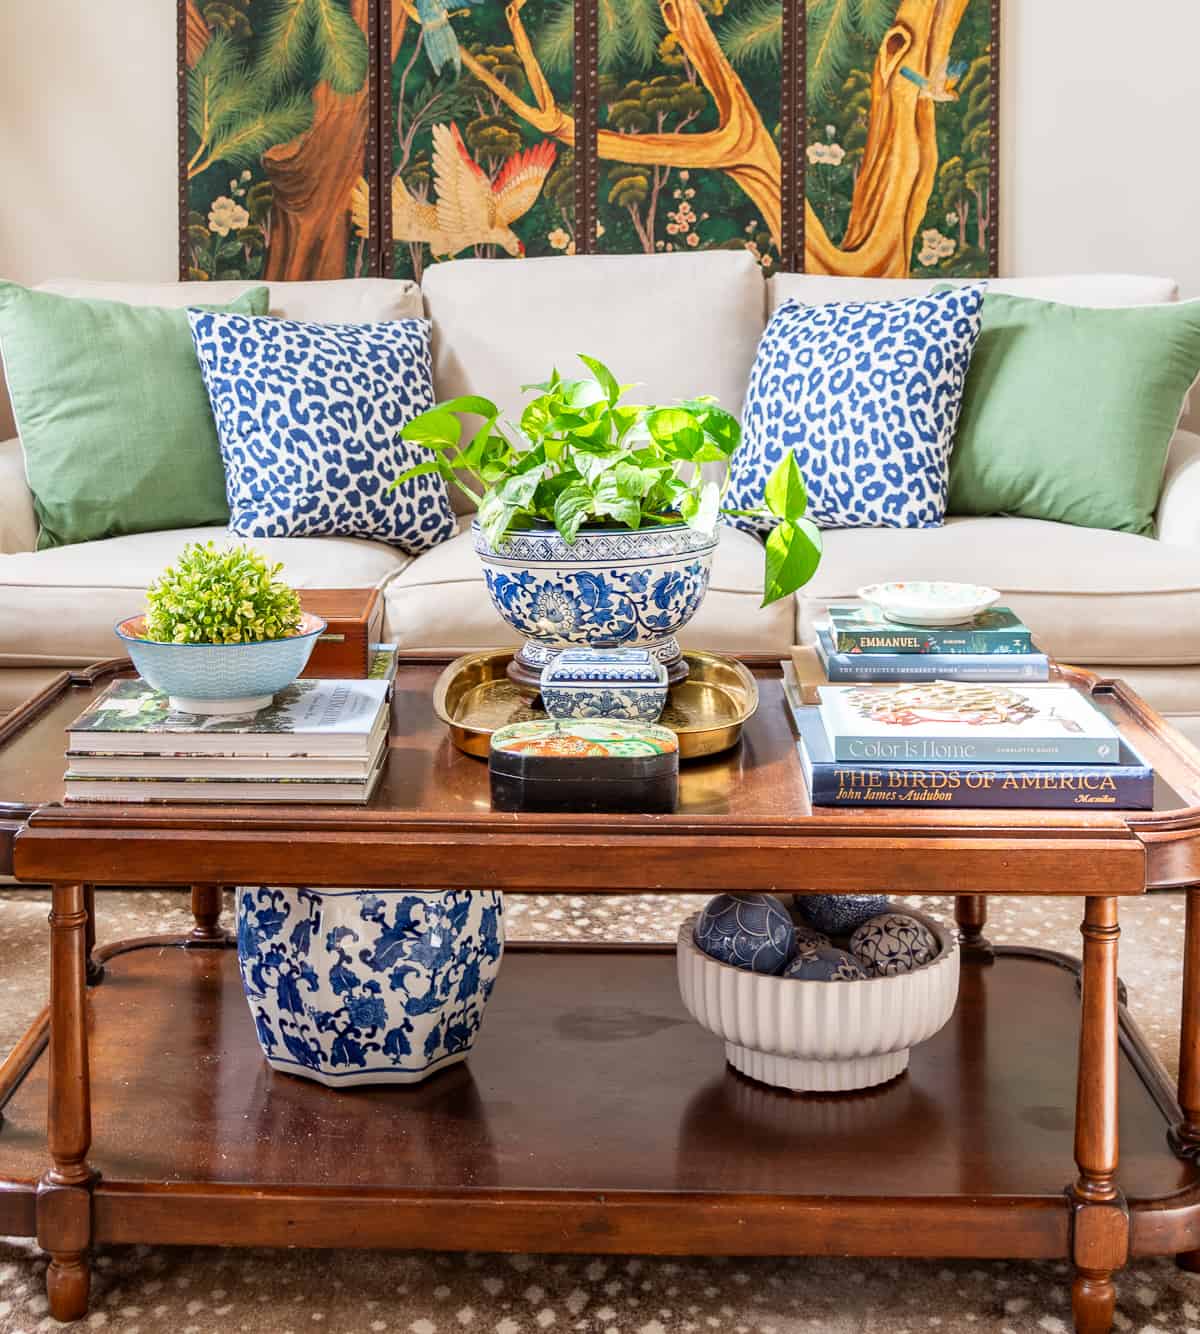 5 Steps to Conquer Your Fear of Decorating